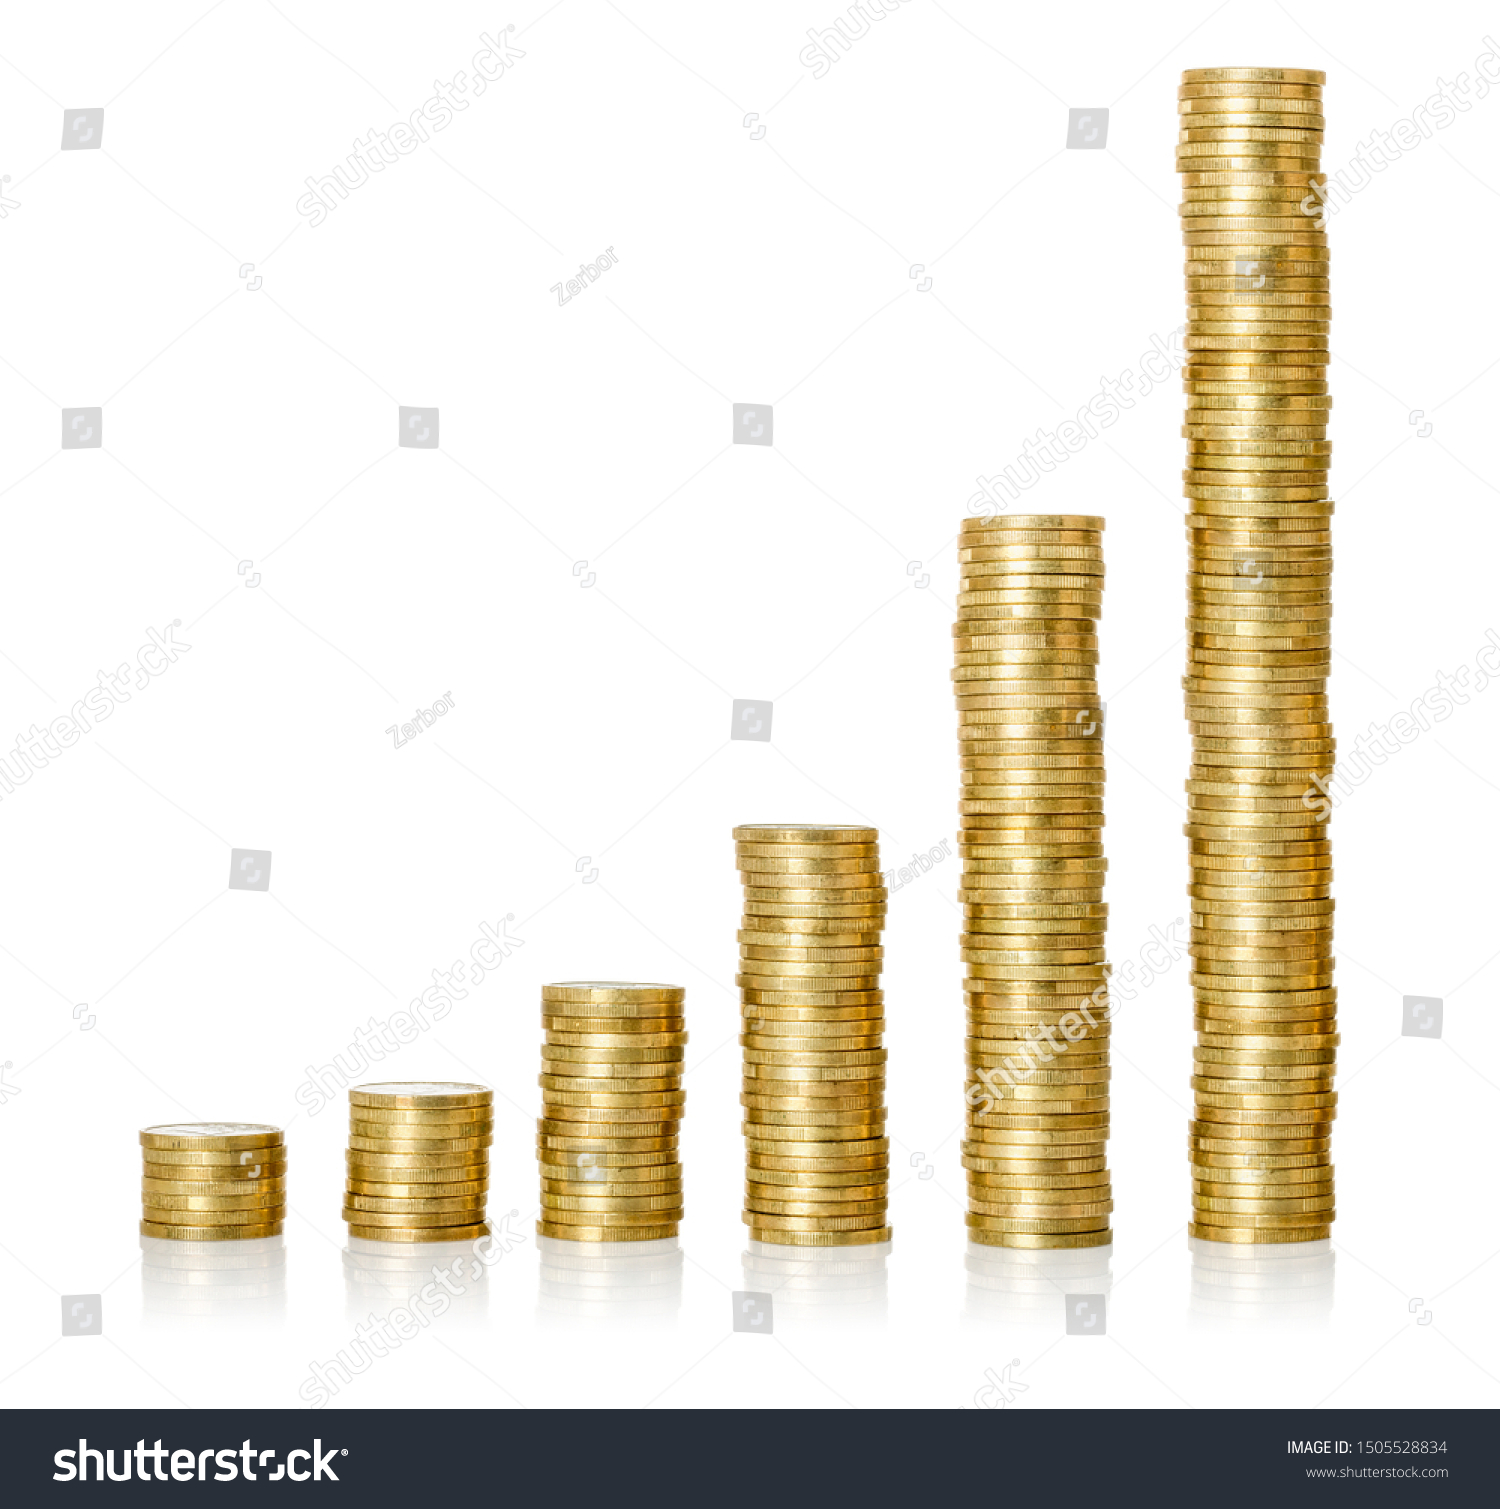 Golden coin stacks on a white background #1505528834